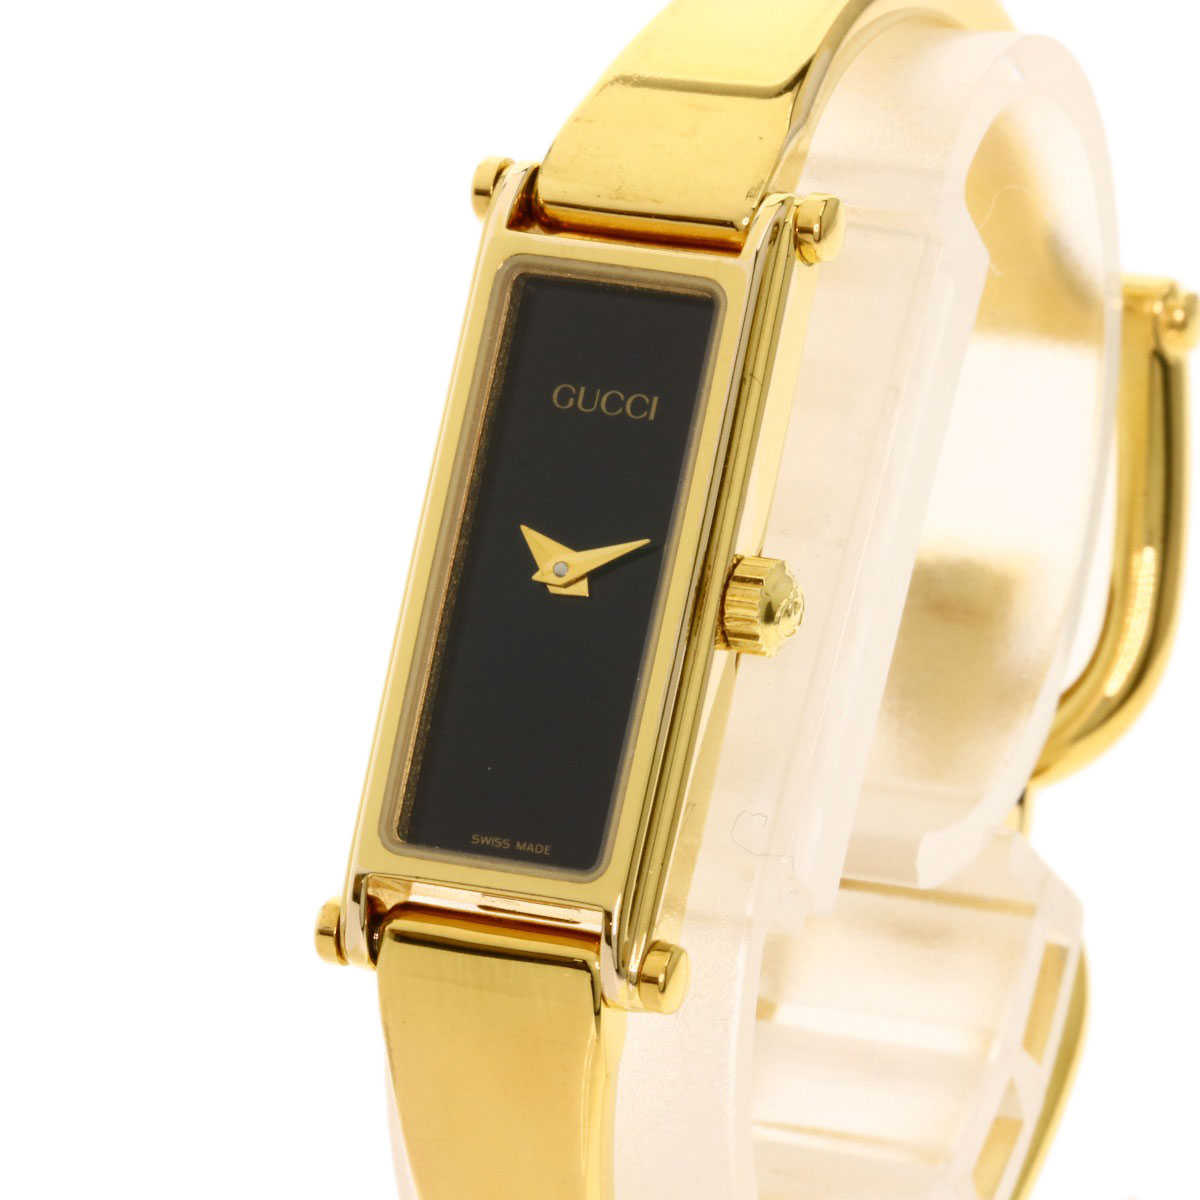 GUCCI Bangle Watches 1500L Gold Plated/Gold Plated Ladies 731903342811 ...